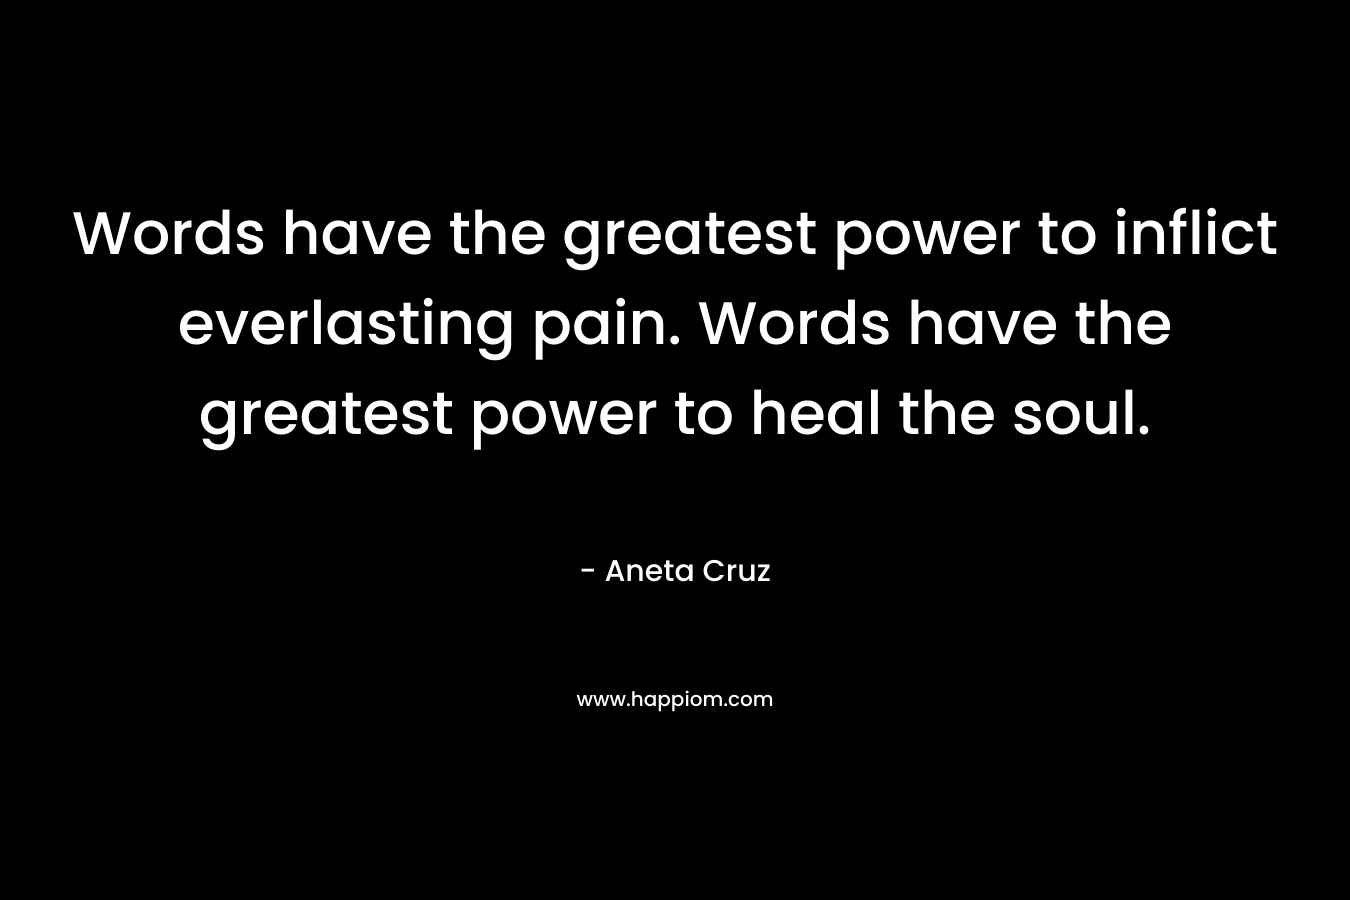 Words have the greatest power to inflict everlasting pain. Words have the greatest power to heal the soul. – Aneta Cruz